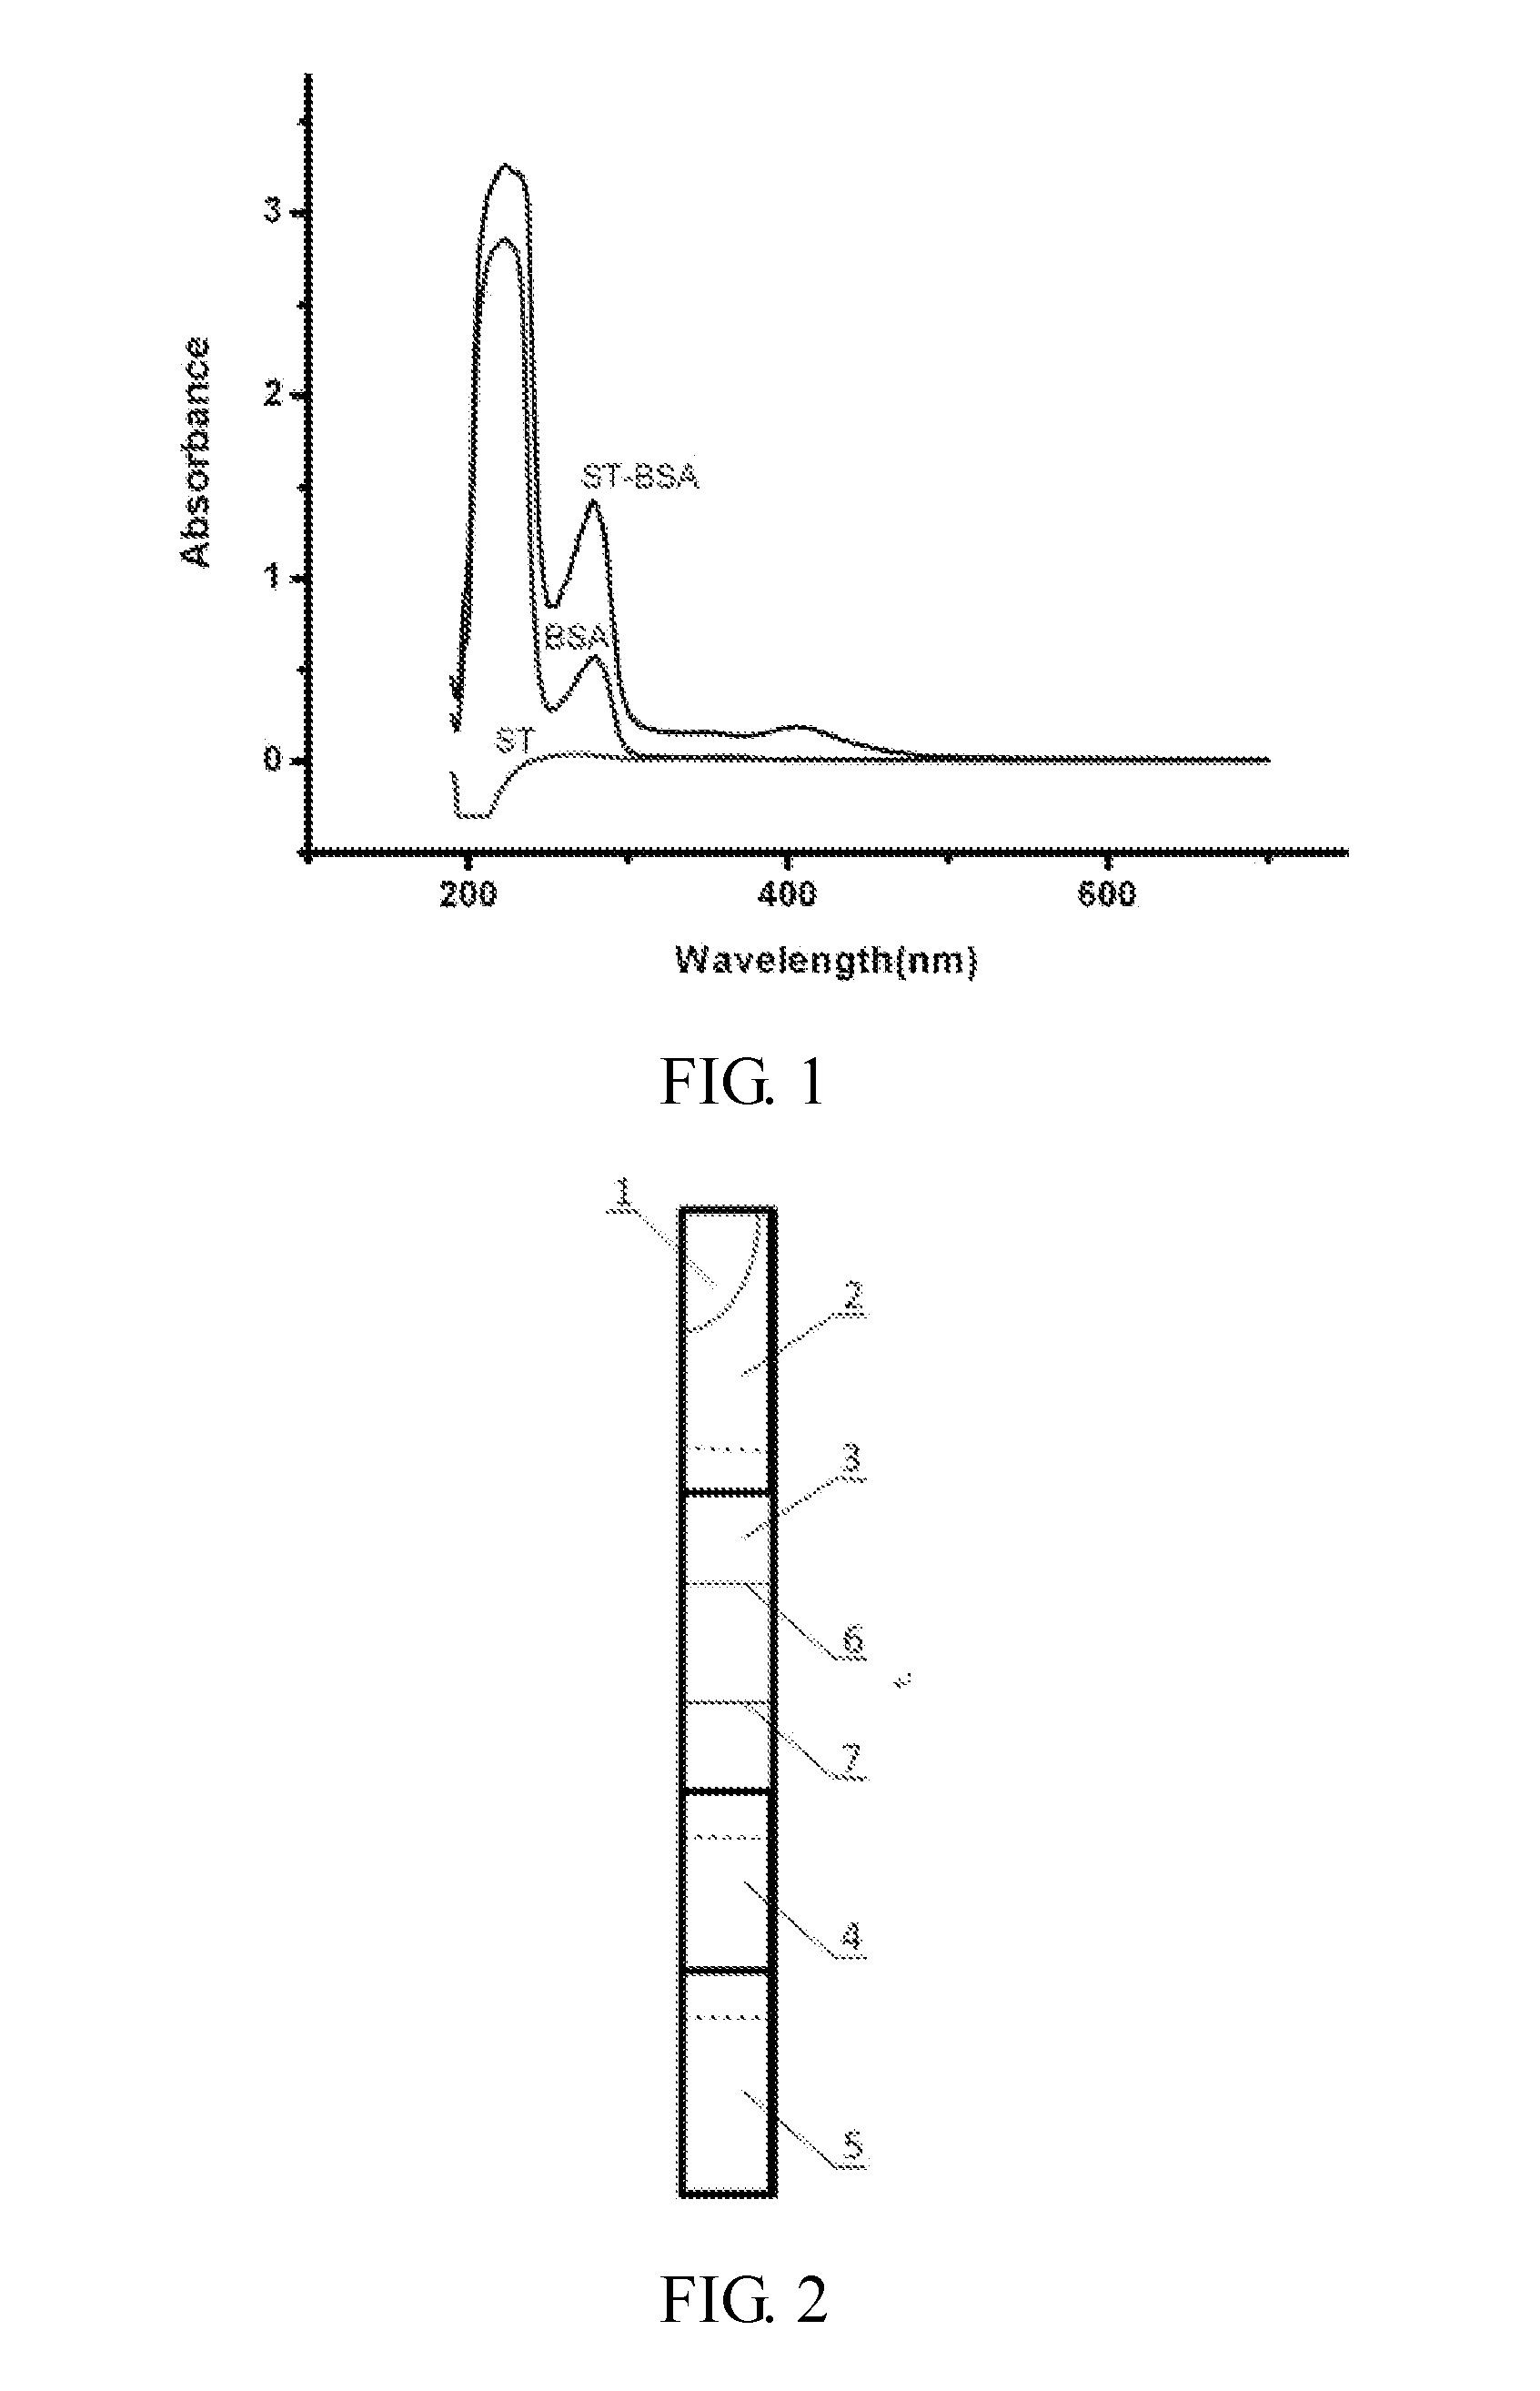 Hybridoma cell line ST03, monoclonal antibody against aflatoxin biosynthetic precursor sterigmatocystin and use thereof